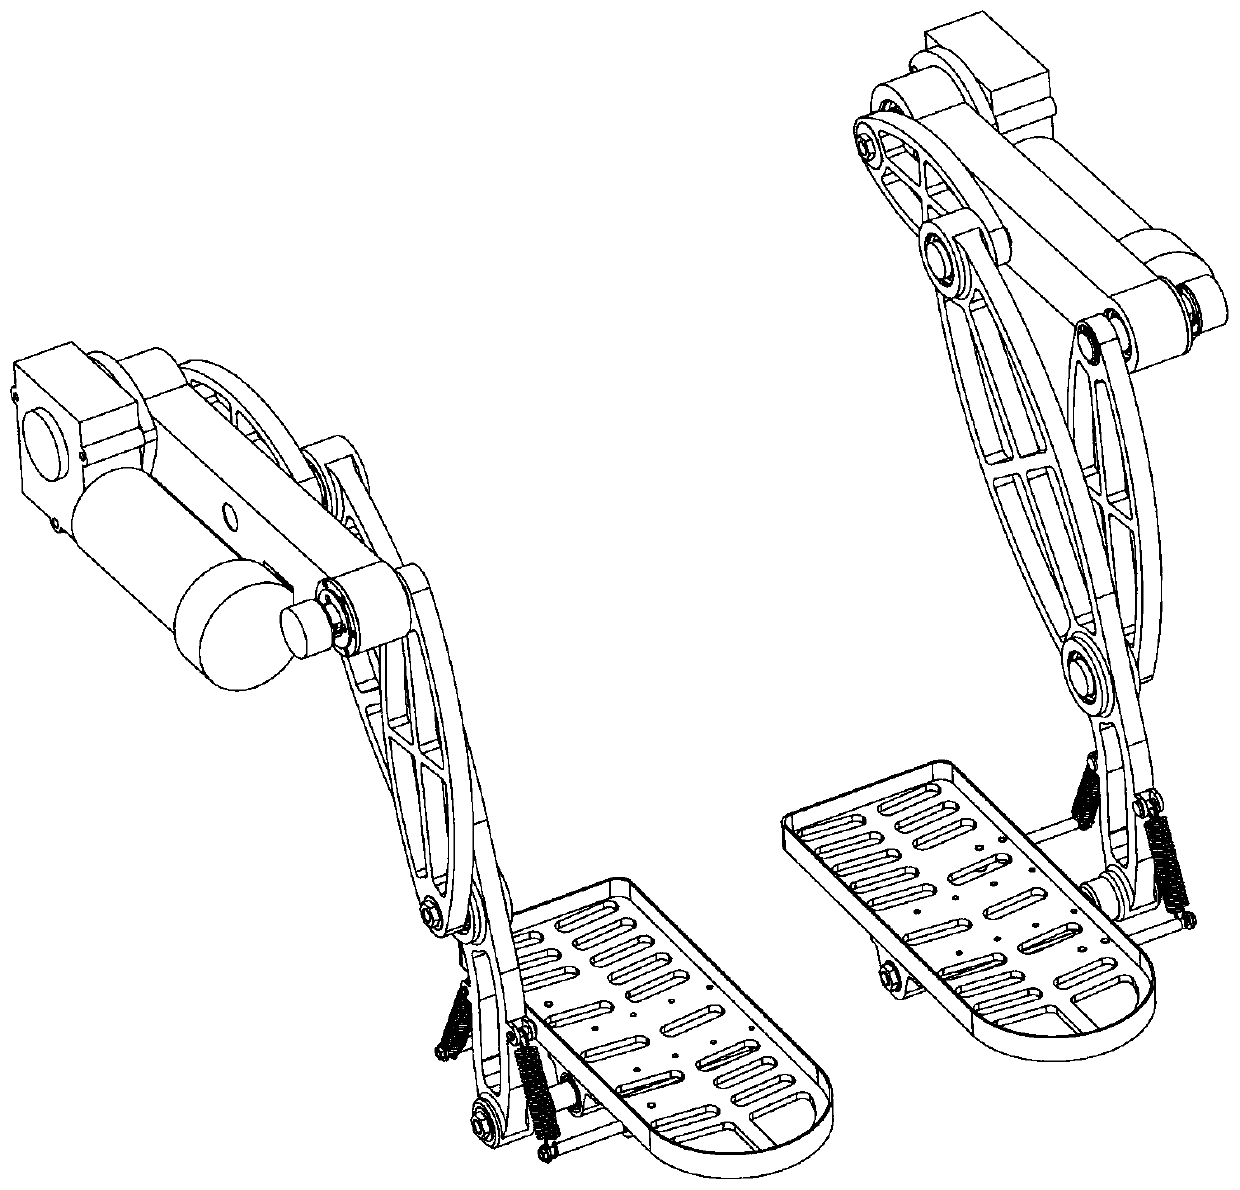 A four-link power-assisted walking mechanism